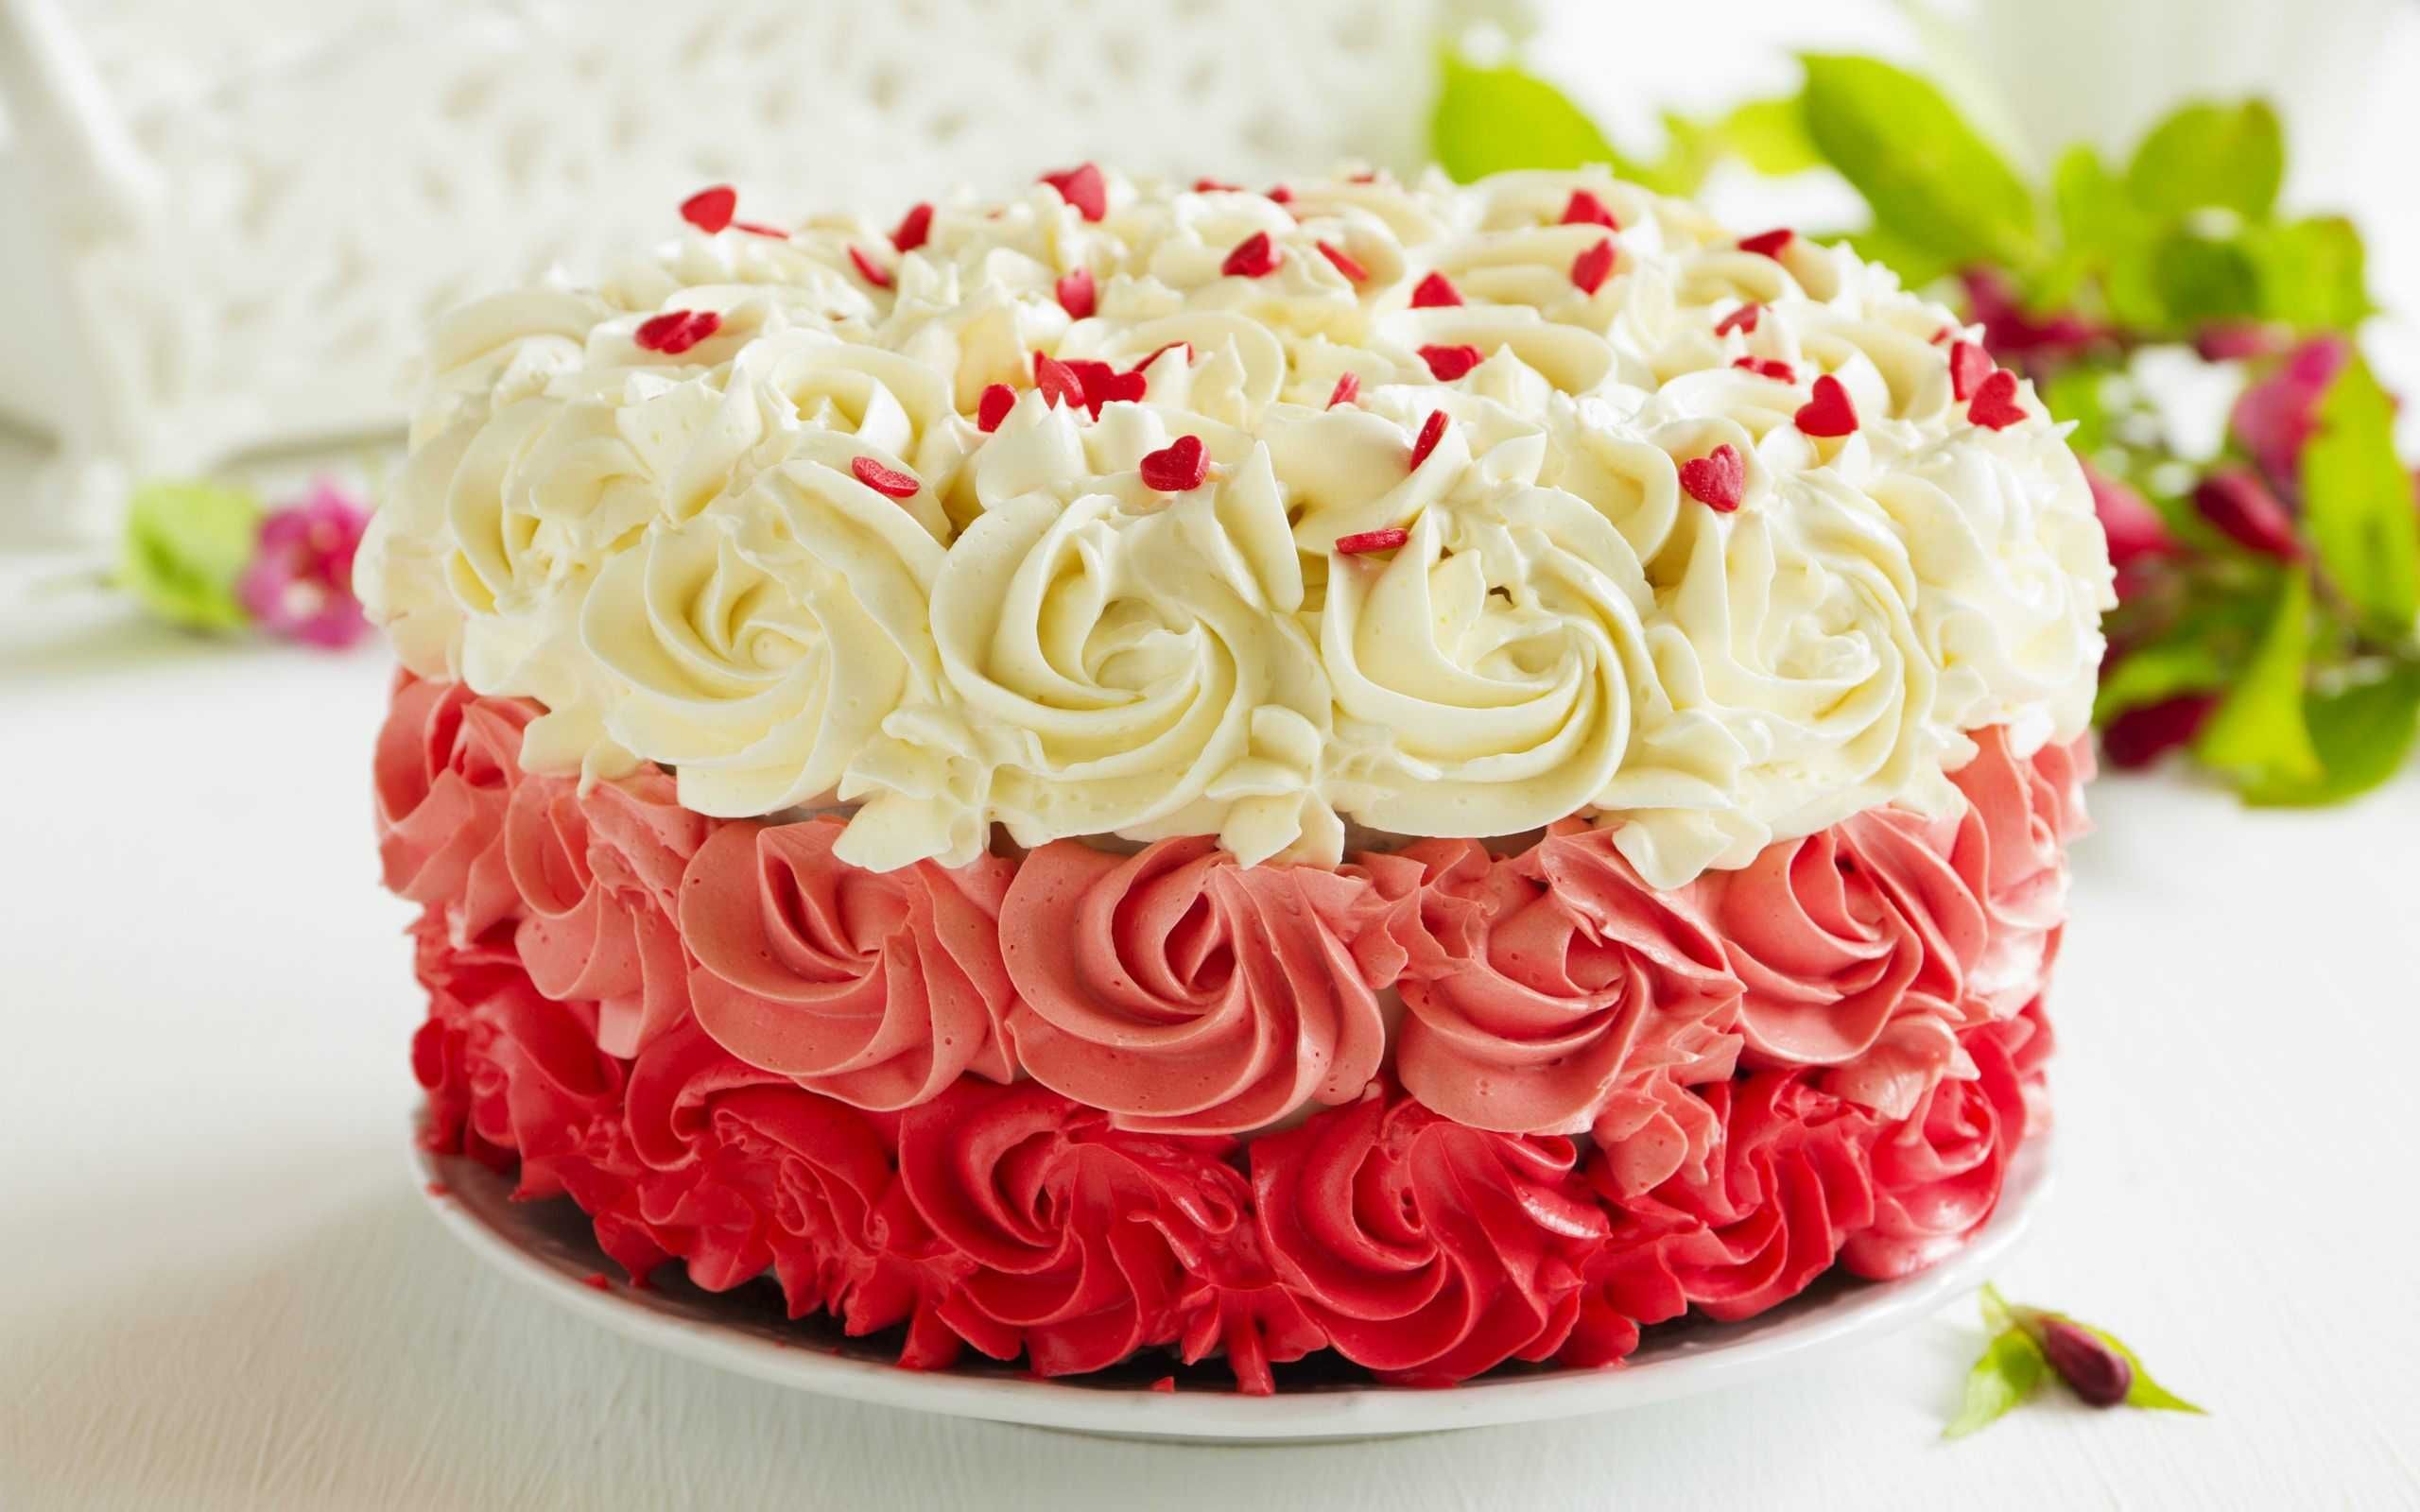 Birthday Cake Wallpaper Hd With Cake Images & Pictures - Hd Cakes - HD Wallpaper 